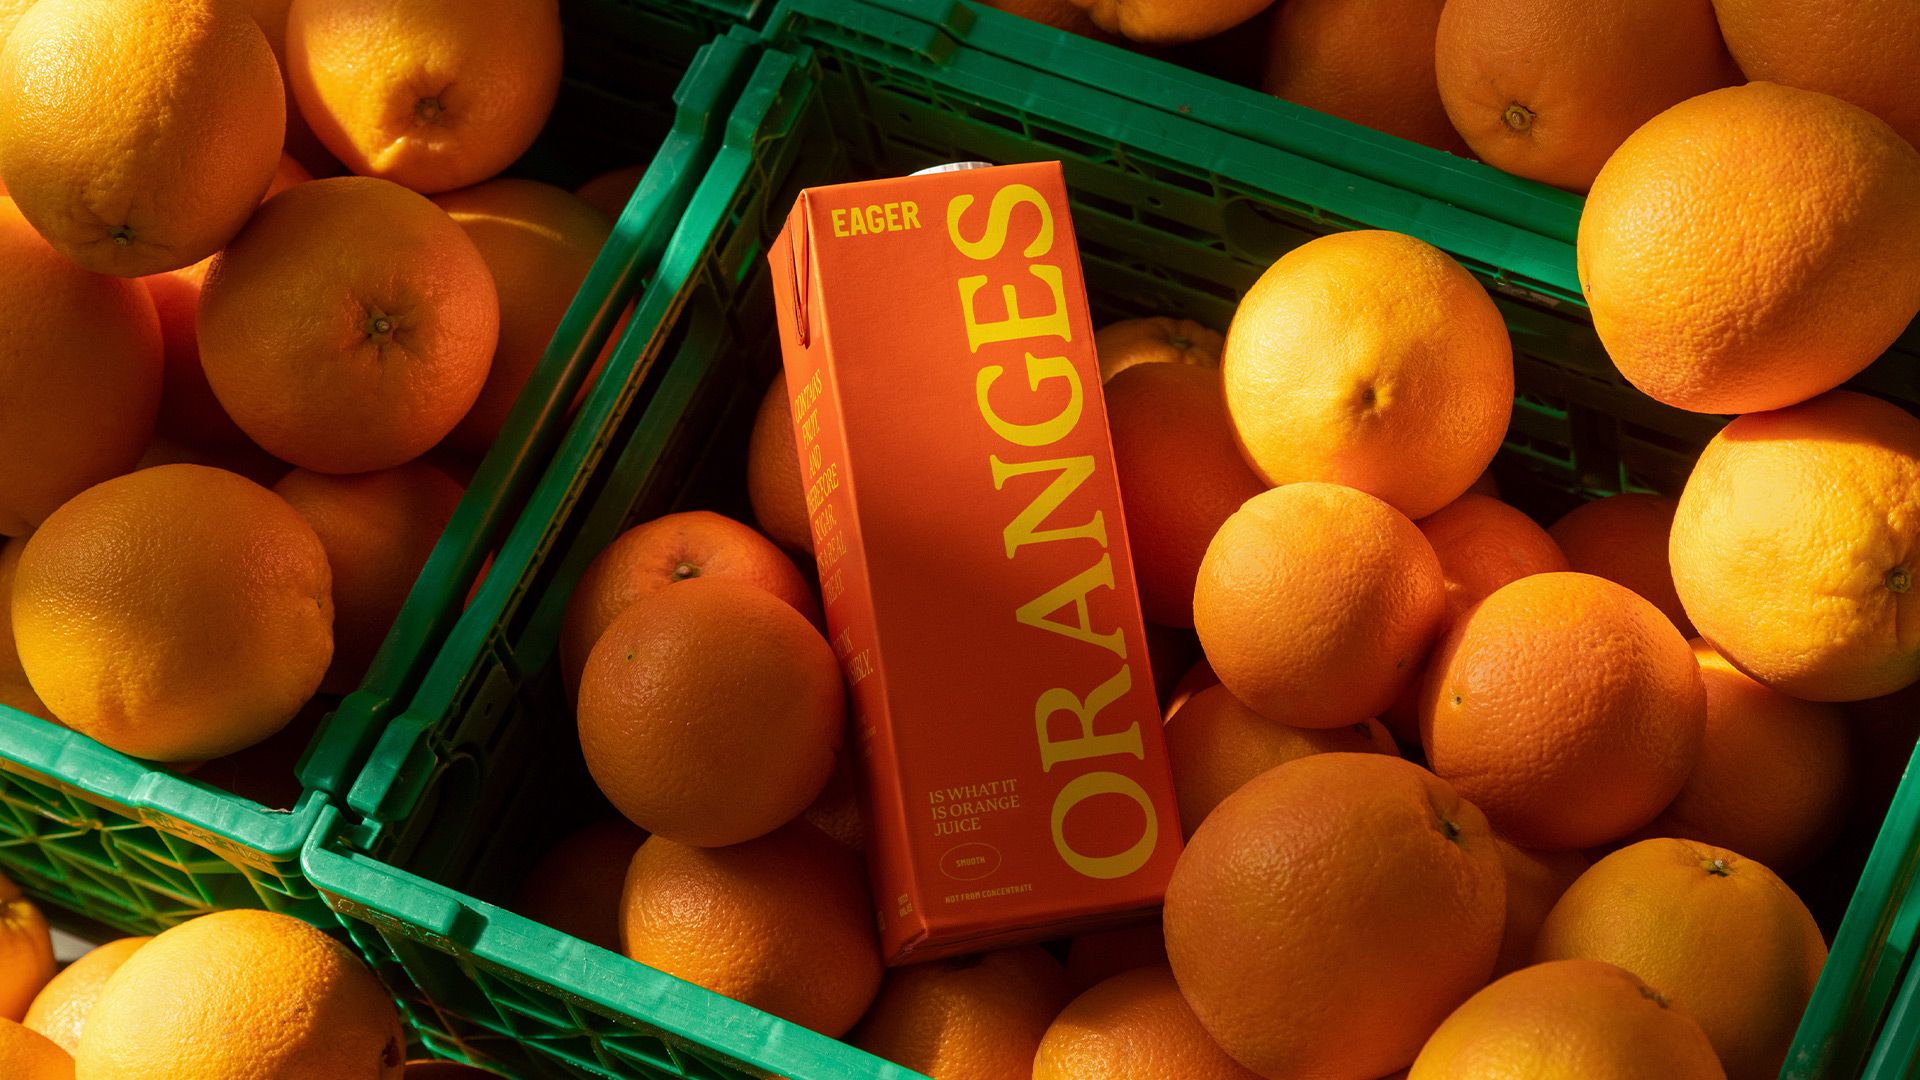 Fruit juice carton packaging design by Ragged Edge for Eager